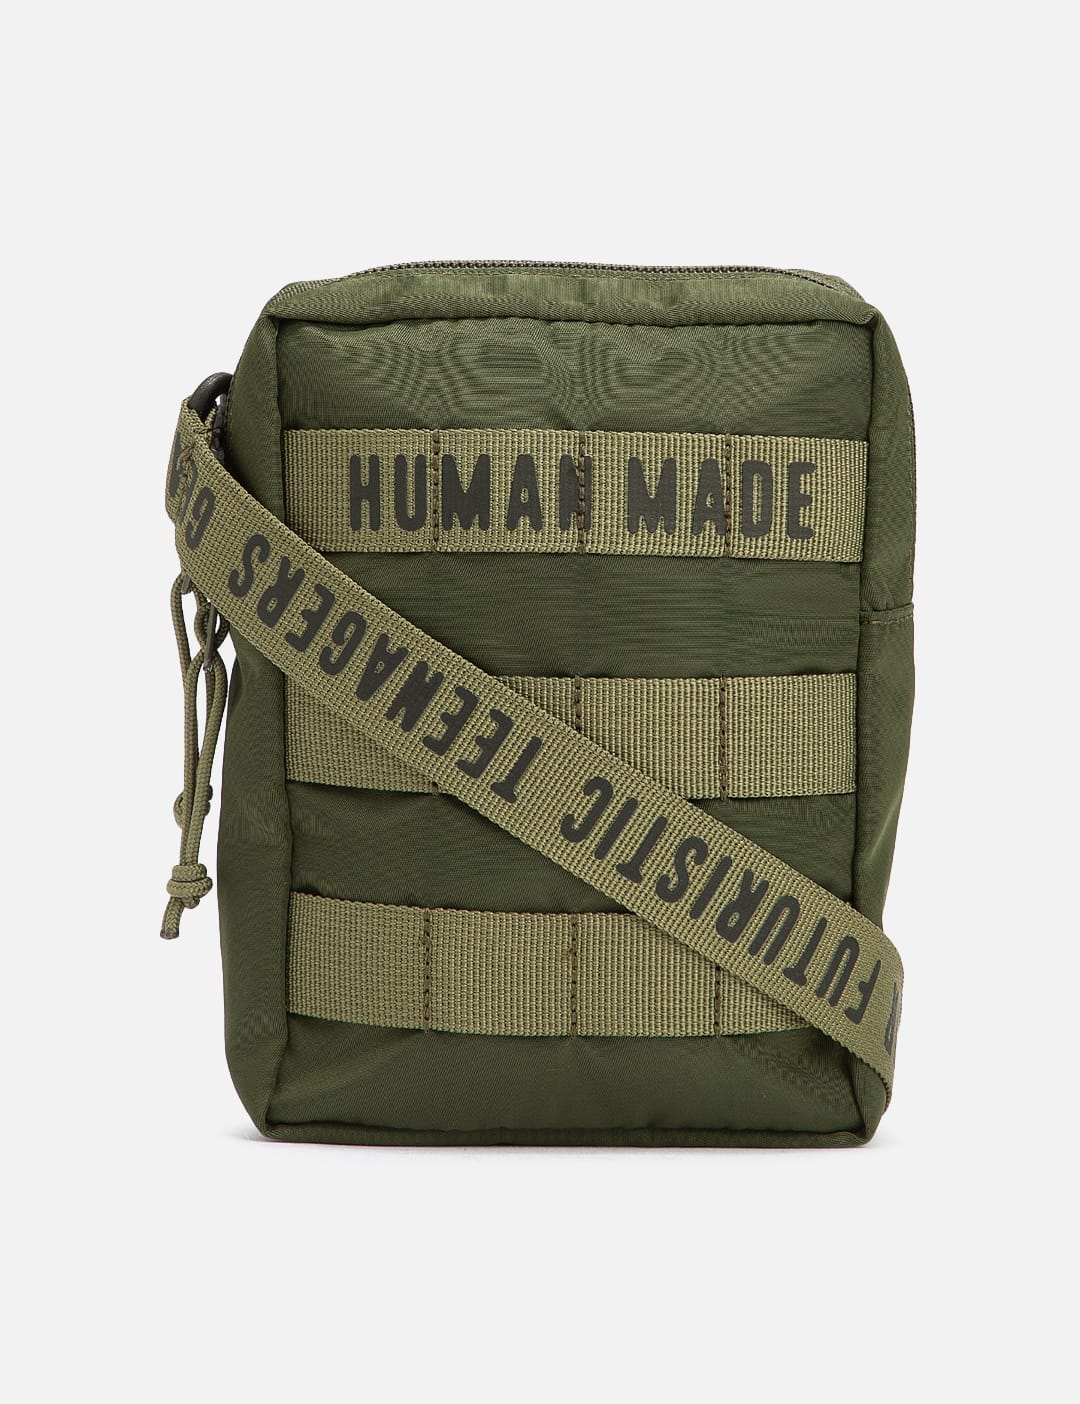 Human Made - Military Pouch #2 | HBX - Globally Curated Fashion 